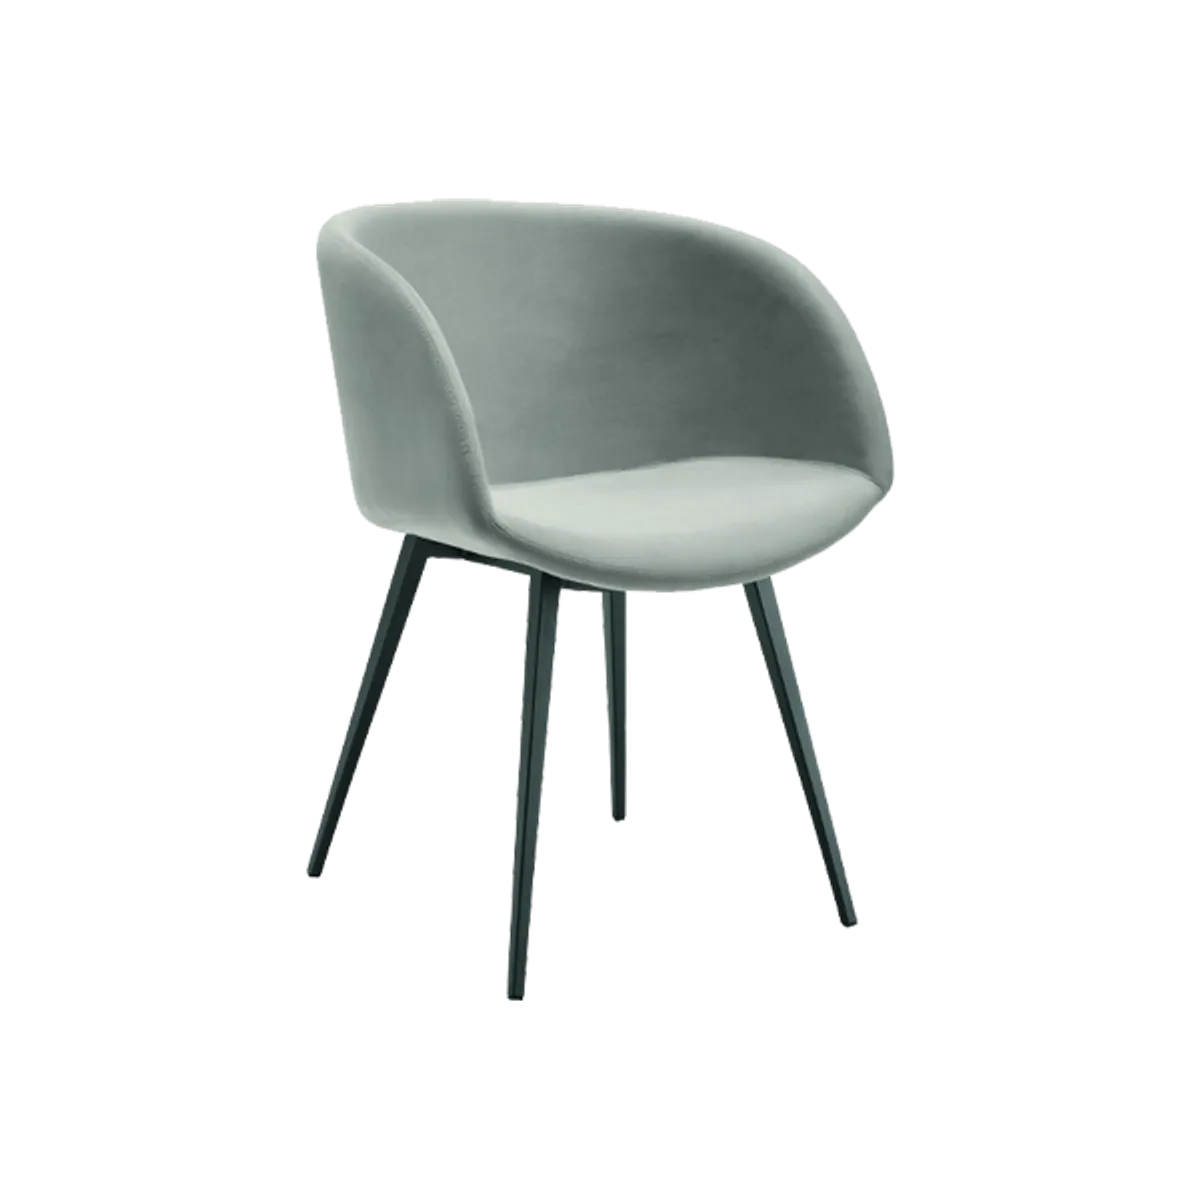 Web Sonny Metal Tub Chair Hotel Lounge Furniture Inside Out Contracts